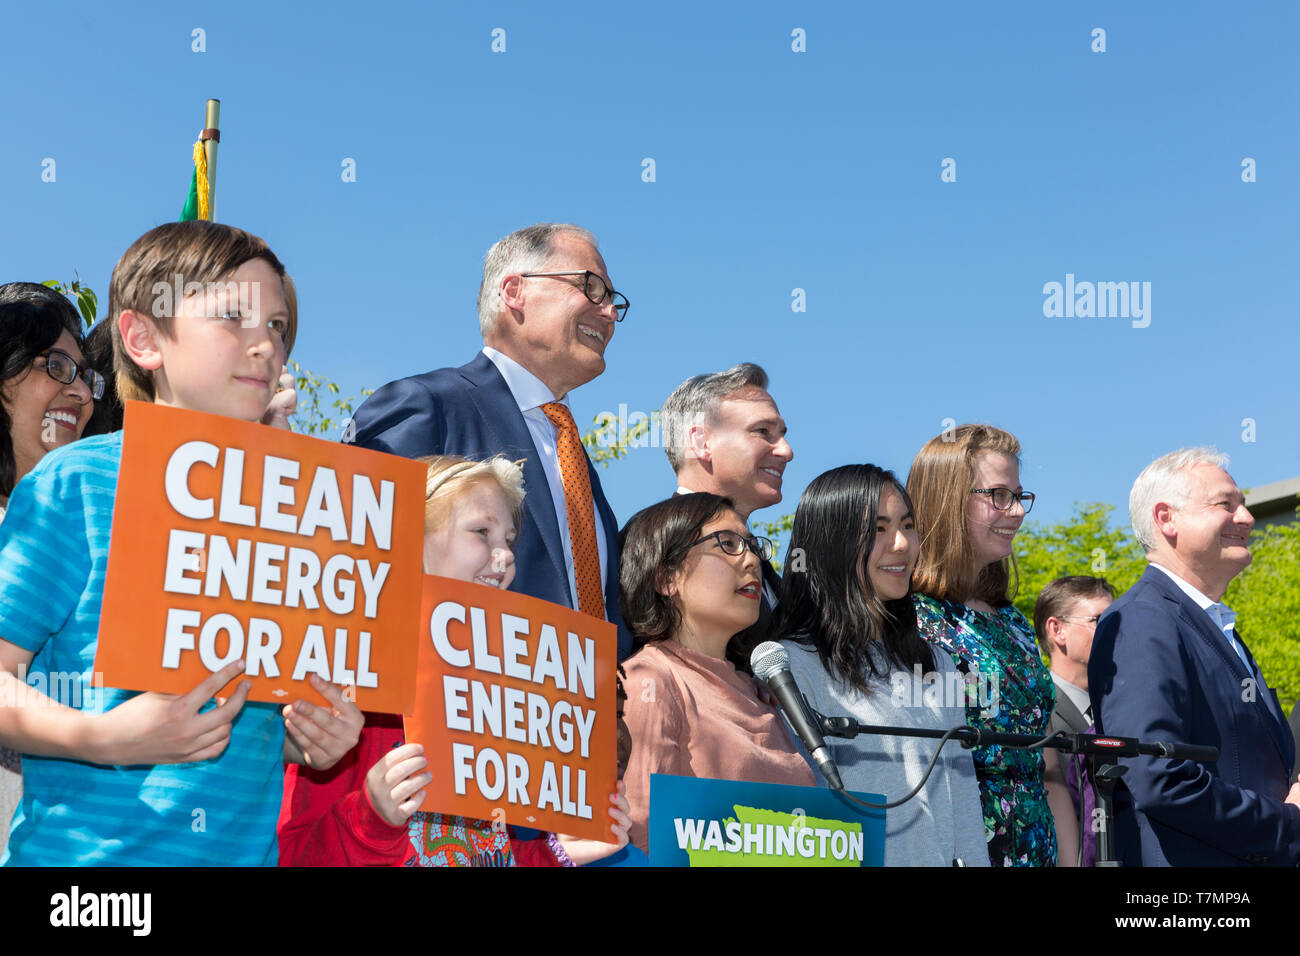 Seattle, USA. 7th May, 2019. Governor and 2020 presidential candidate Jay Inslee poses with supporters, state and local legislators after signing the nation’s strongest clean energy bill at Neighborhood House in the Rainier Vista neighborhood. The legislation, introduced by the governor in December, includes a 100 percent clean energy bill, a first-in-the-nation clean buildings policy, a reduction of greenhouse gas emissions, and incentives to electrify transportation. Inslee has centered his presidential campaign around climate change and environmental issues. Credit: Paul Christian Gordon/Al Stock Photo